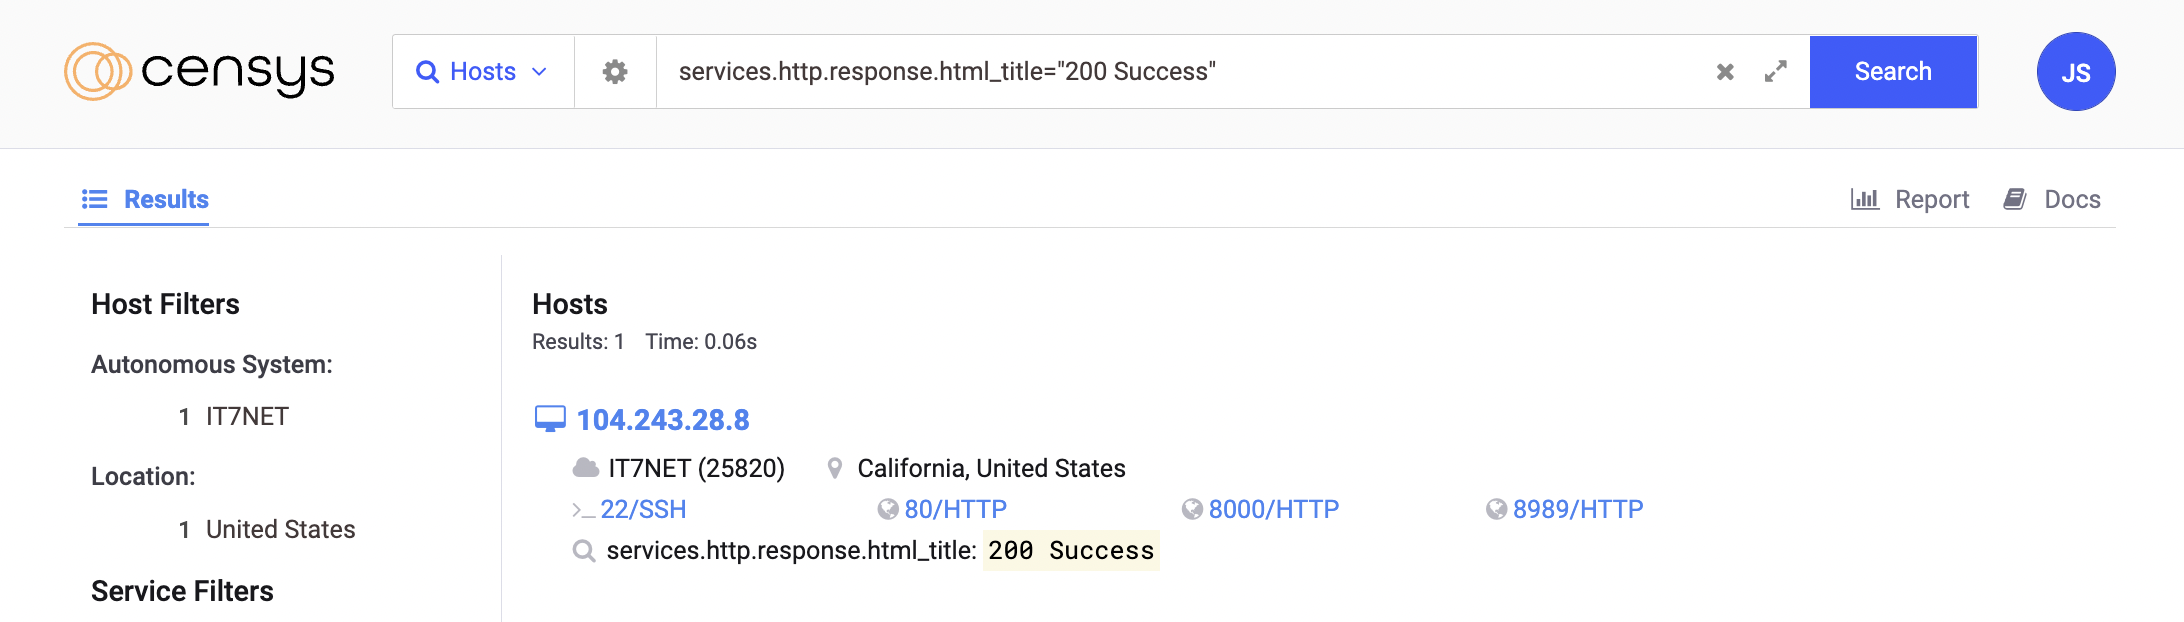 The search results page showing a single hit for a host with an HTTP services whose HTML title is exactly the phrase "200 Success"